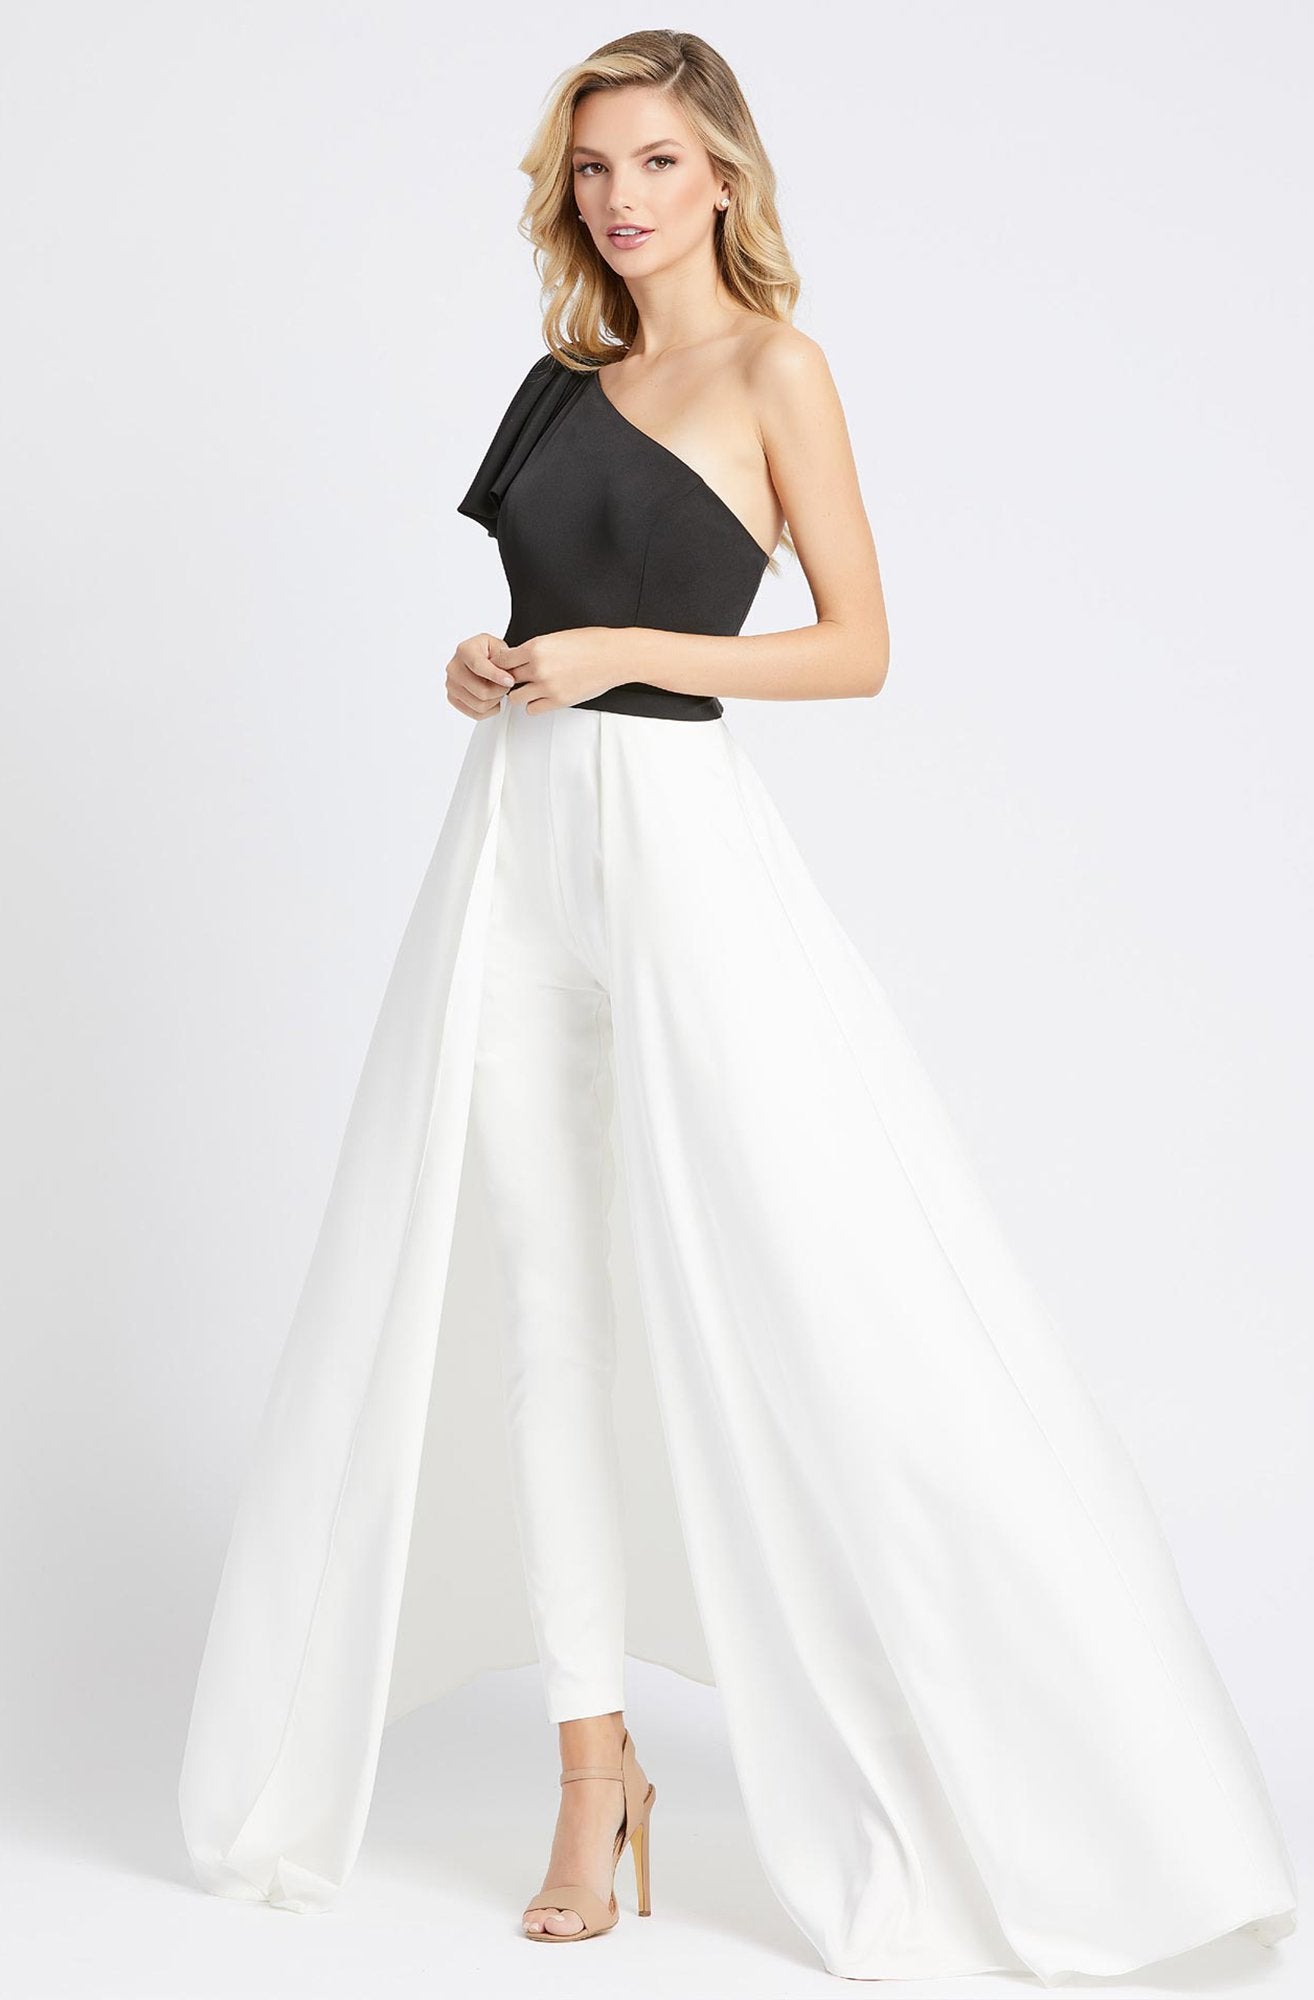 Ieena Duggal - 26191I Two Tone Asymmetric Jumpsuit With Overskirt In Black and White